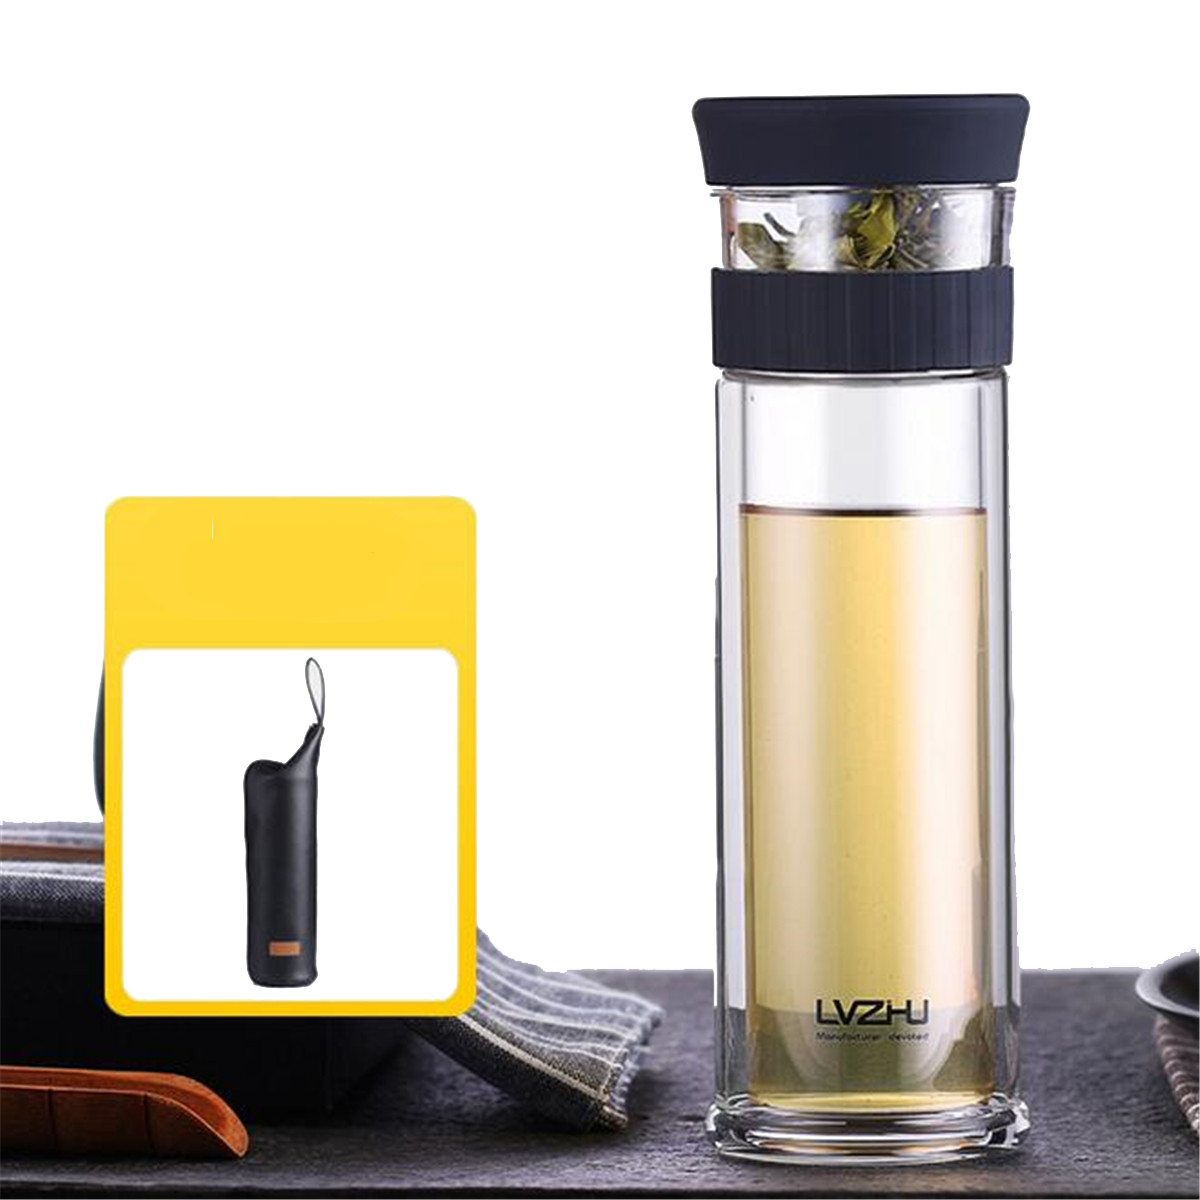 

300ml 400ml Glass Water Bottle Double Wall Cup Drinking Mug With Tea Infuser